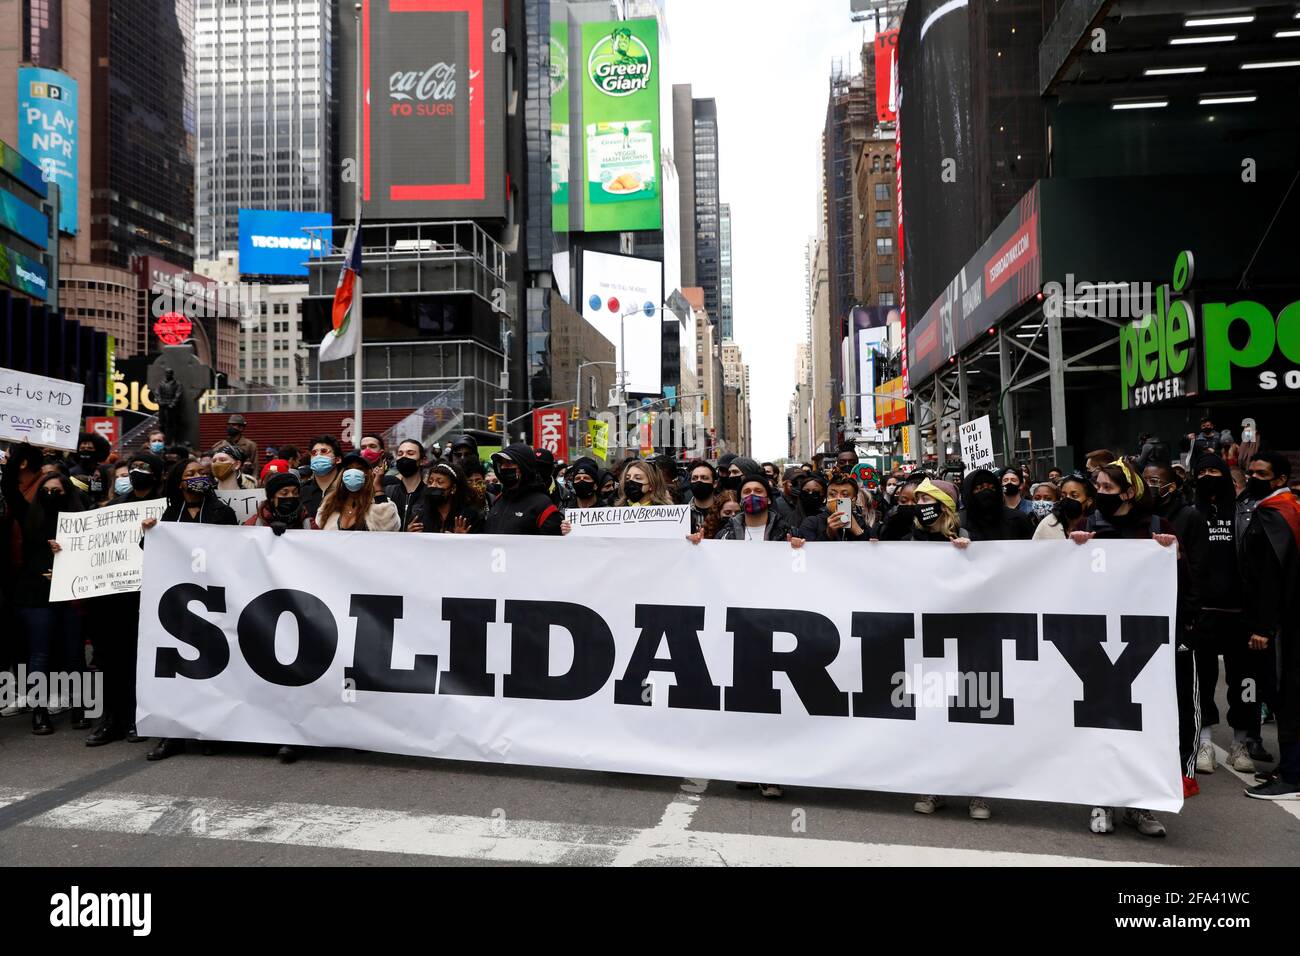 People gather during the 'March on Broadway' protest to demand proper accountability and safe work environments in the theater industry and held after abuse allegations against producer Scott Rudin, in Times Square, Manhattan, New York City, New York, U.S., April 22, 2021. REUTERS/Andrew Kelly Stock Photo